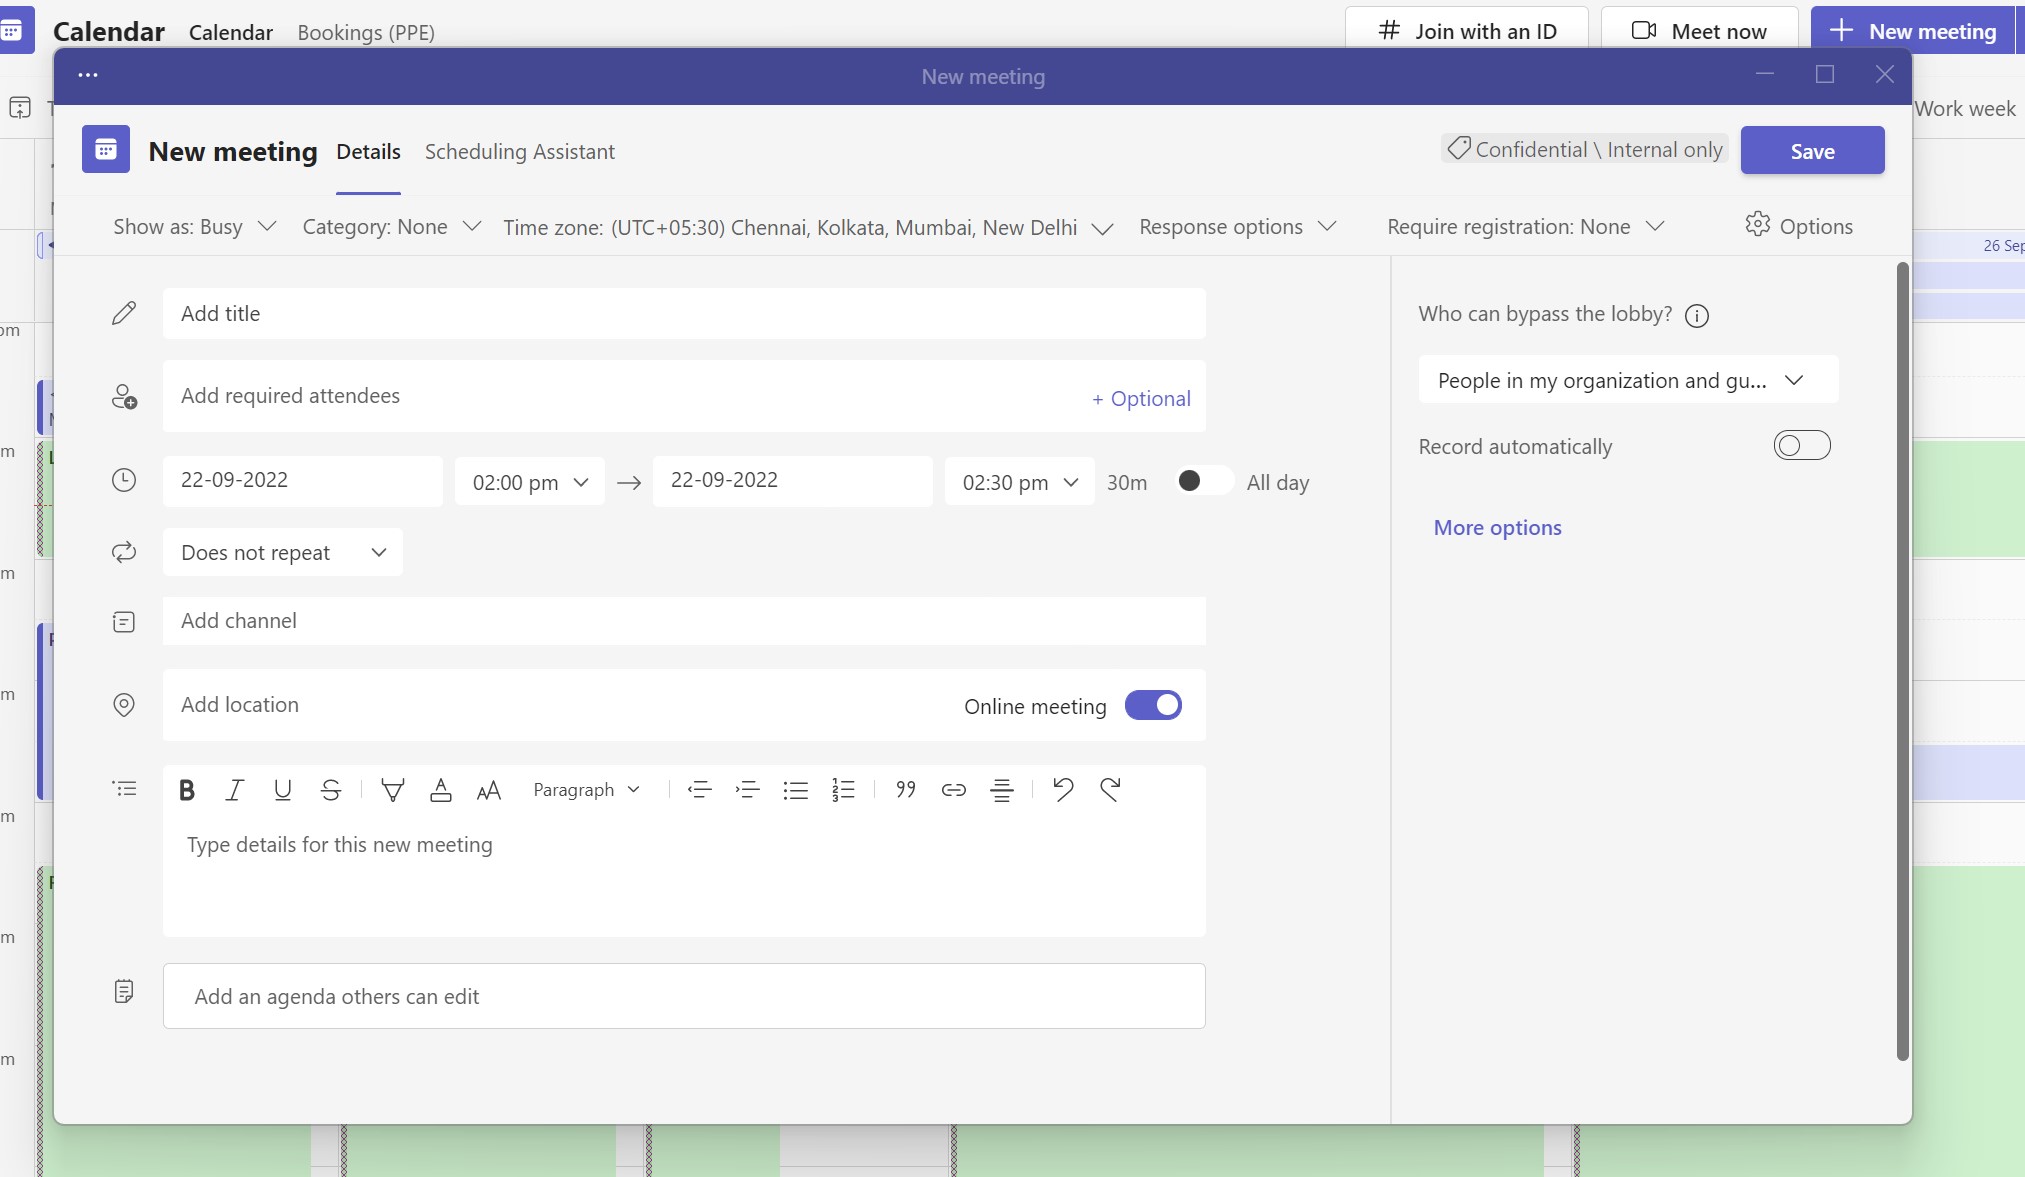 Users will see the new scheduling form window while creating a new meeting.